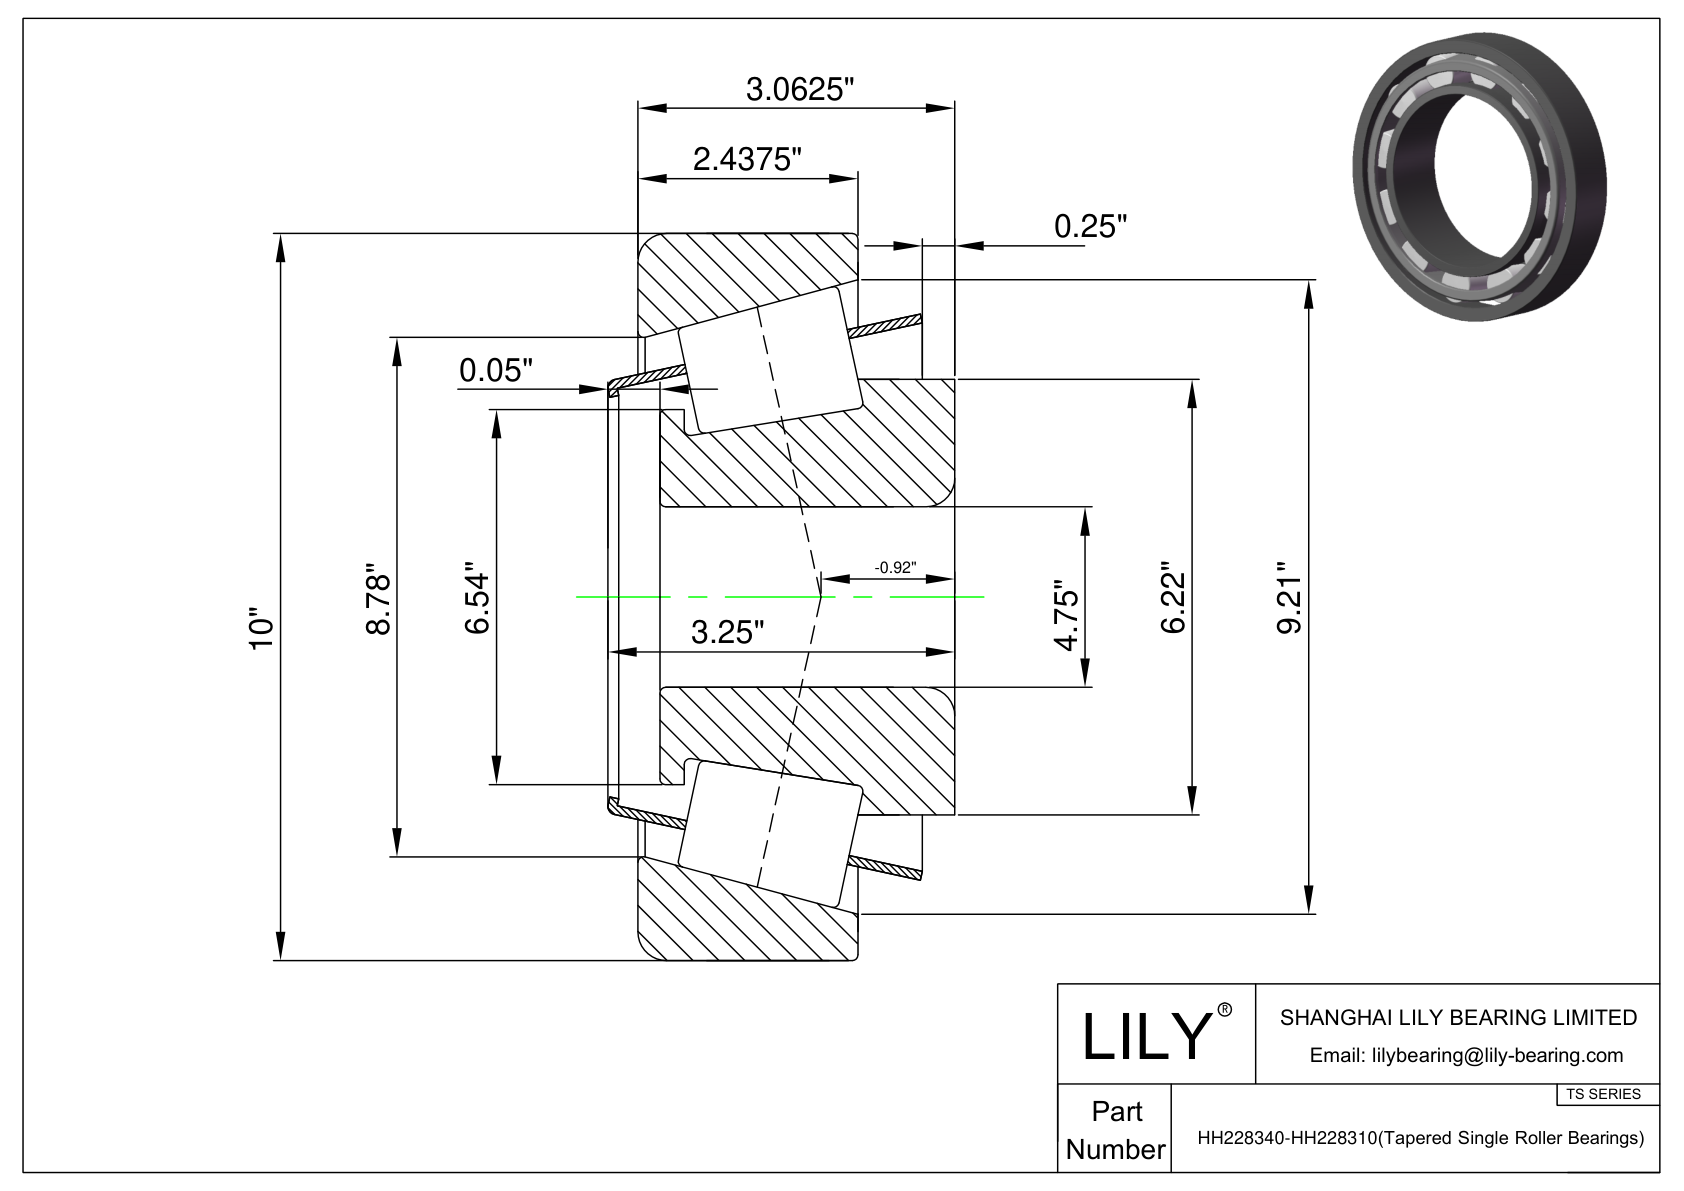 HH228340-HH228310 TS (Tapered Single Roller Bearings) (Imperial) cad drawing